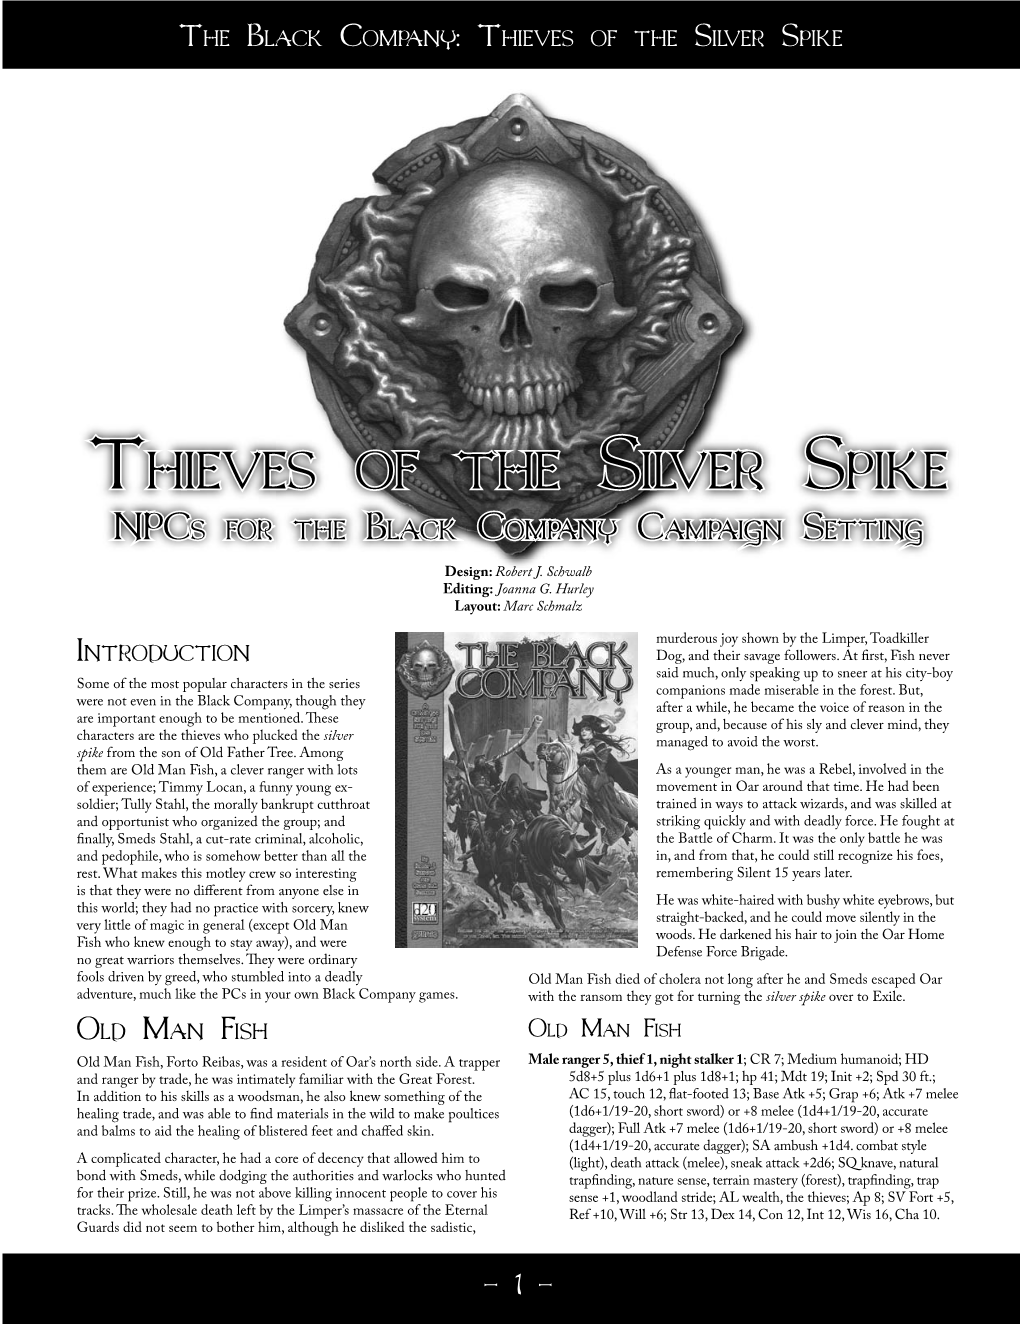 Thieves of the Silver Spike